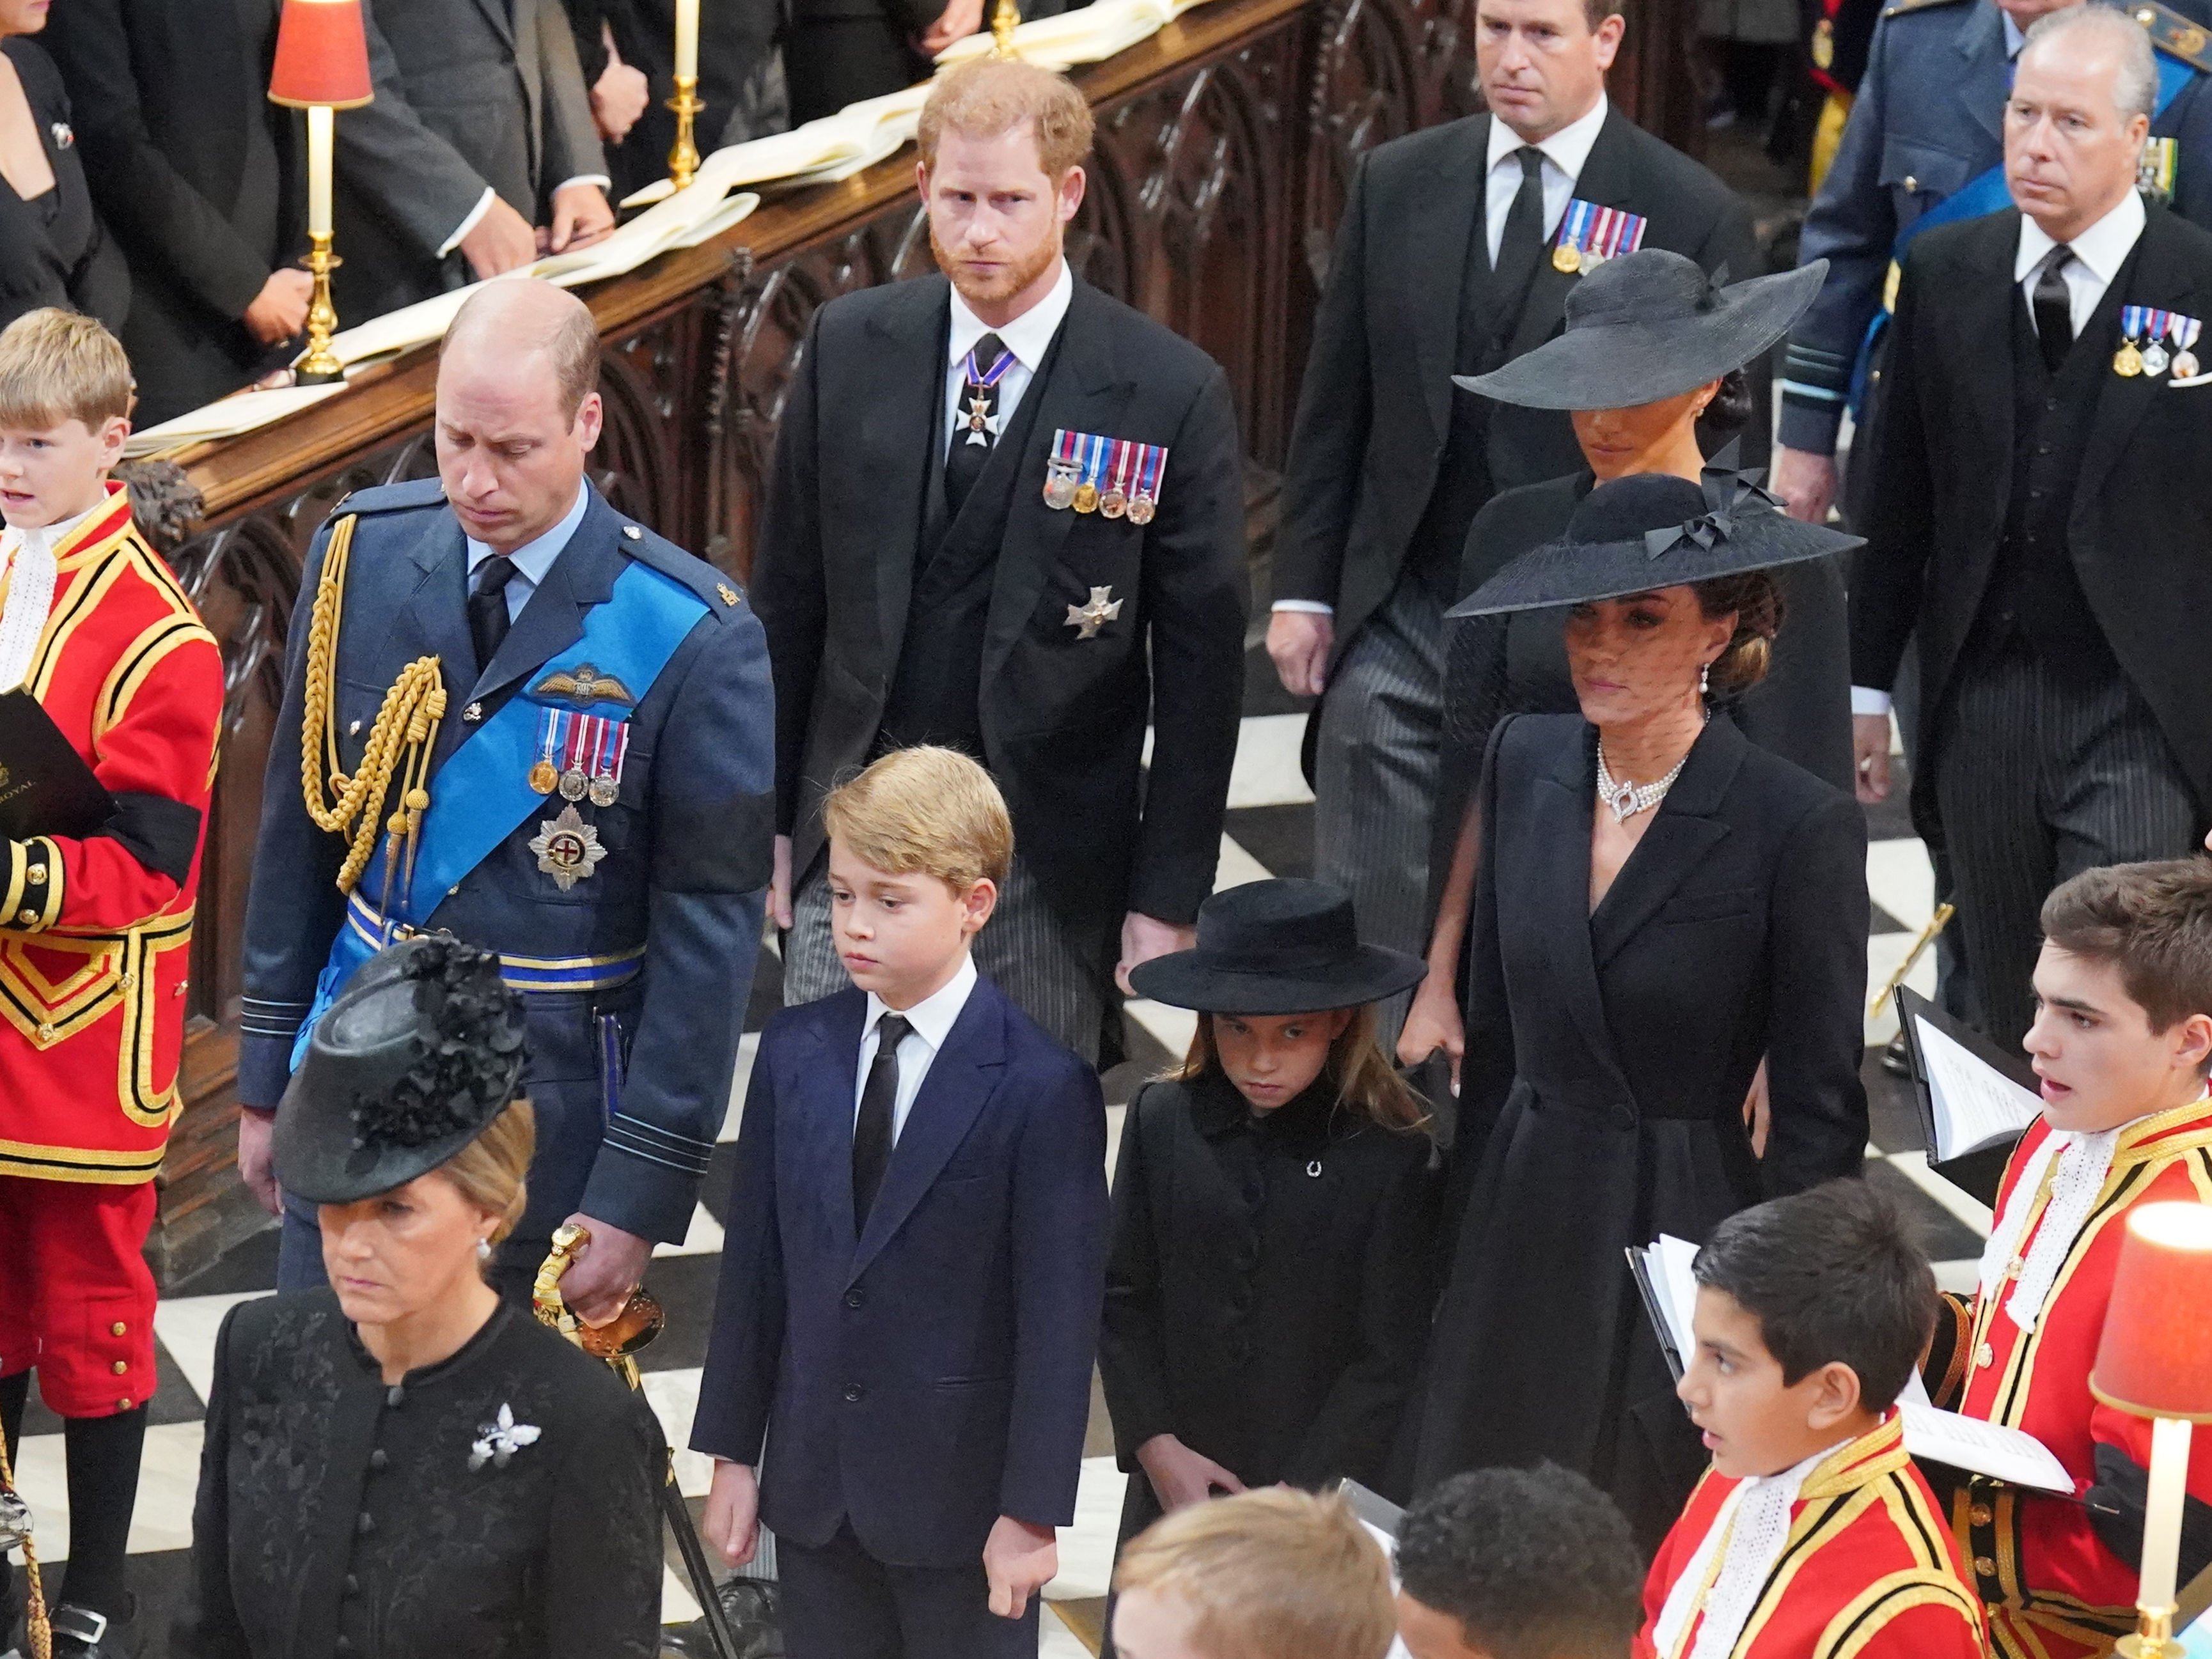 Prince William, Prince George, Prince Harry, Meghan Markle and Kate Middleton, during Queen Elizabeth II's state funeral at Westminster Abbey on September 19, 2022 in London, England |  Source: Getty Images